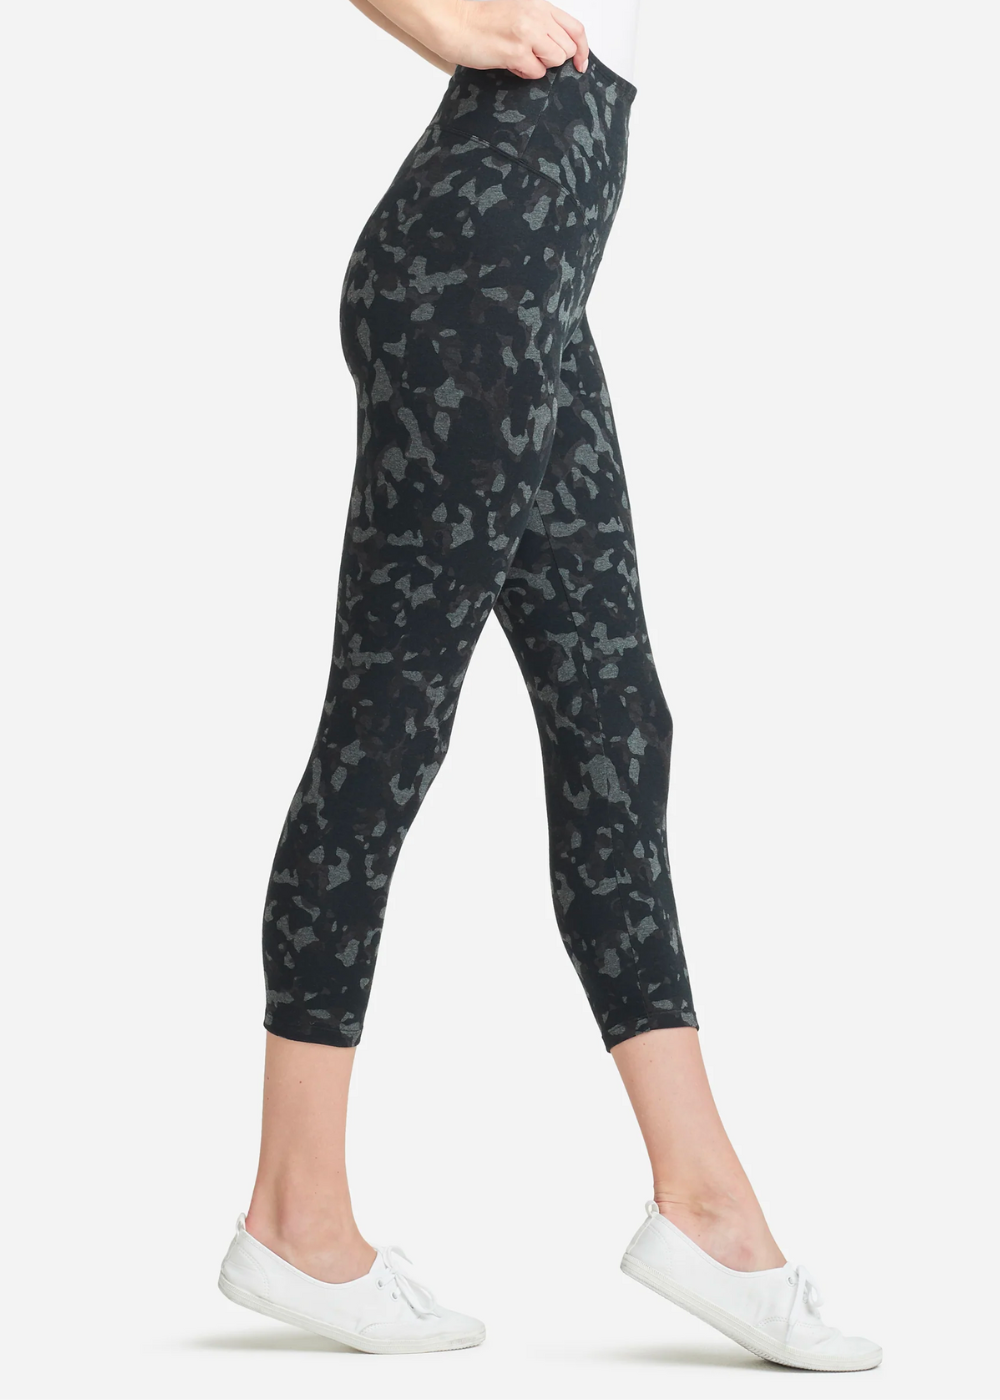 Gloria 7/8 Ankle Shaping Legging - Cotton Stretch from Yummie in Heather Charcoal Camo  - 1